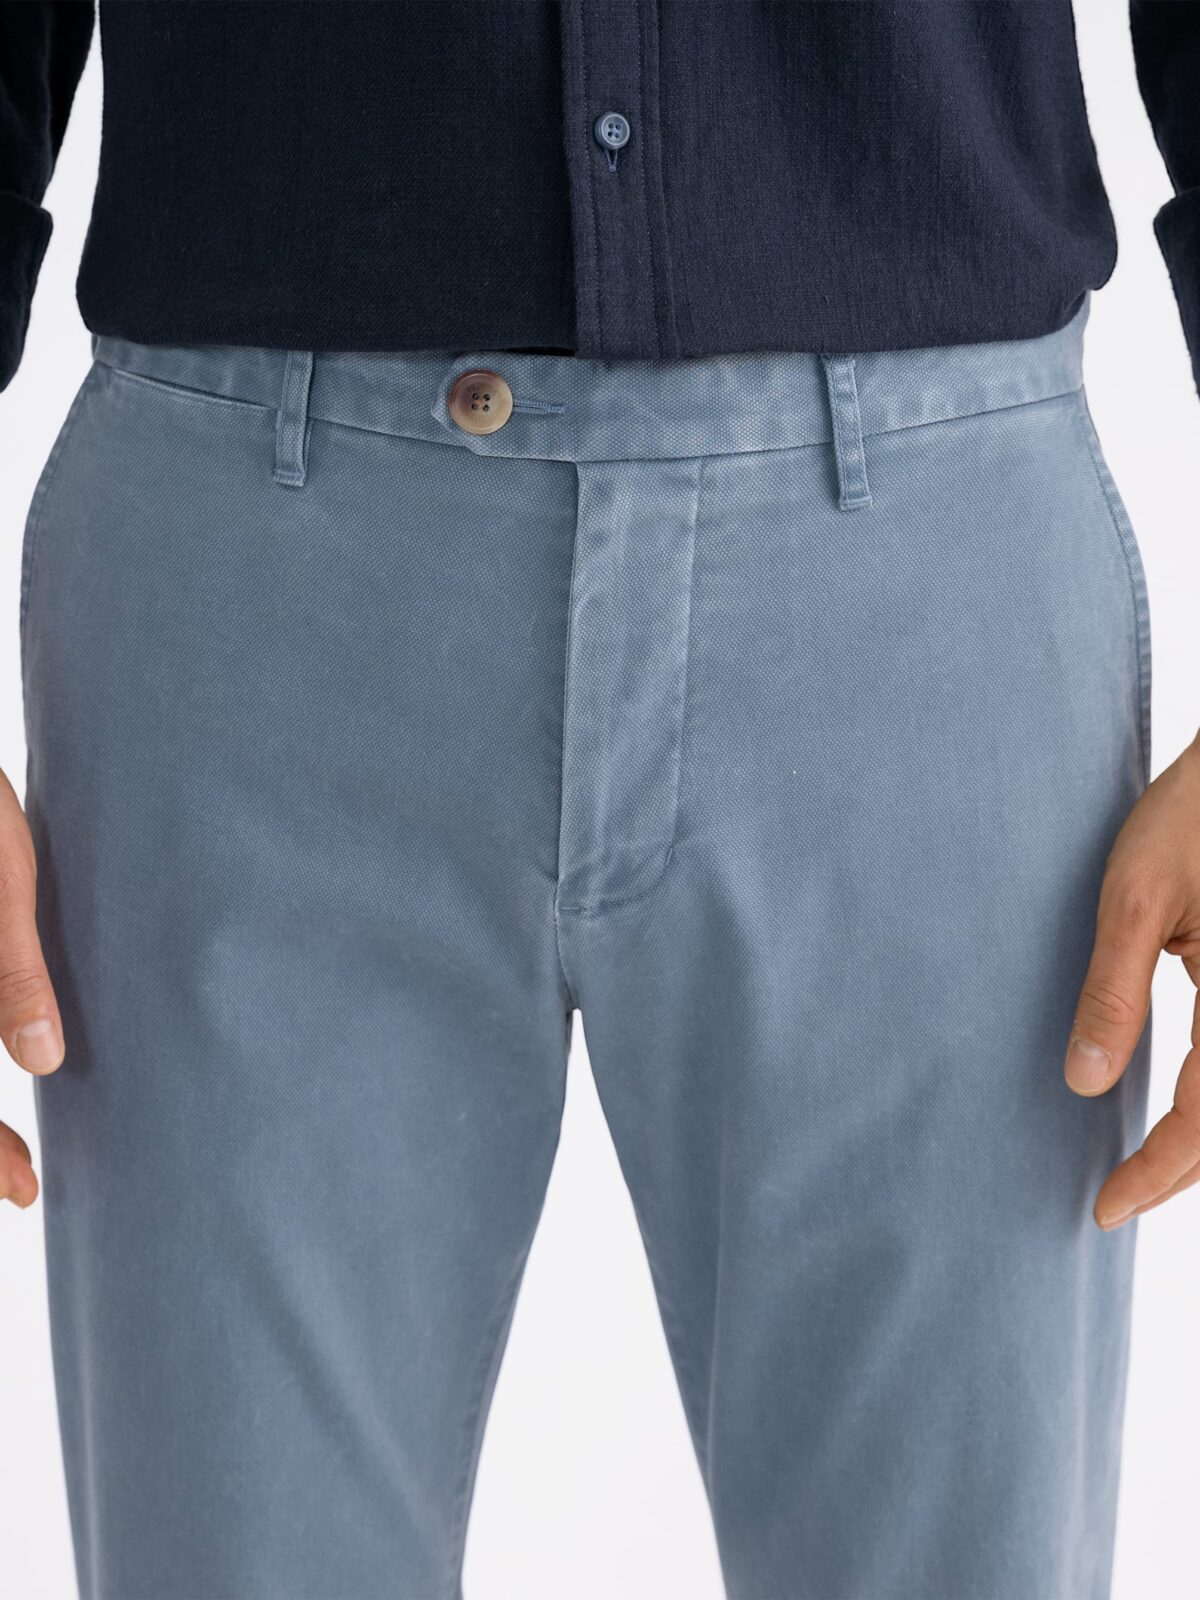 Zip Fly Pale Blue Chino Trousers | Men's Country Clothing | Cordings US